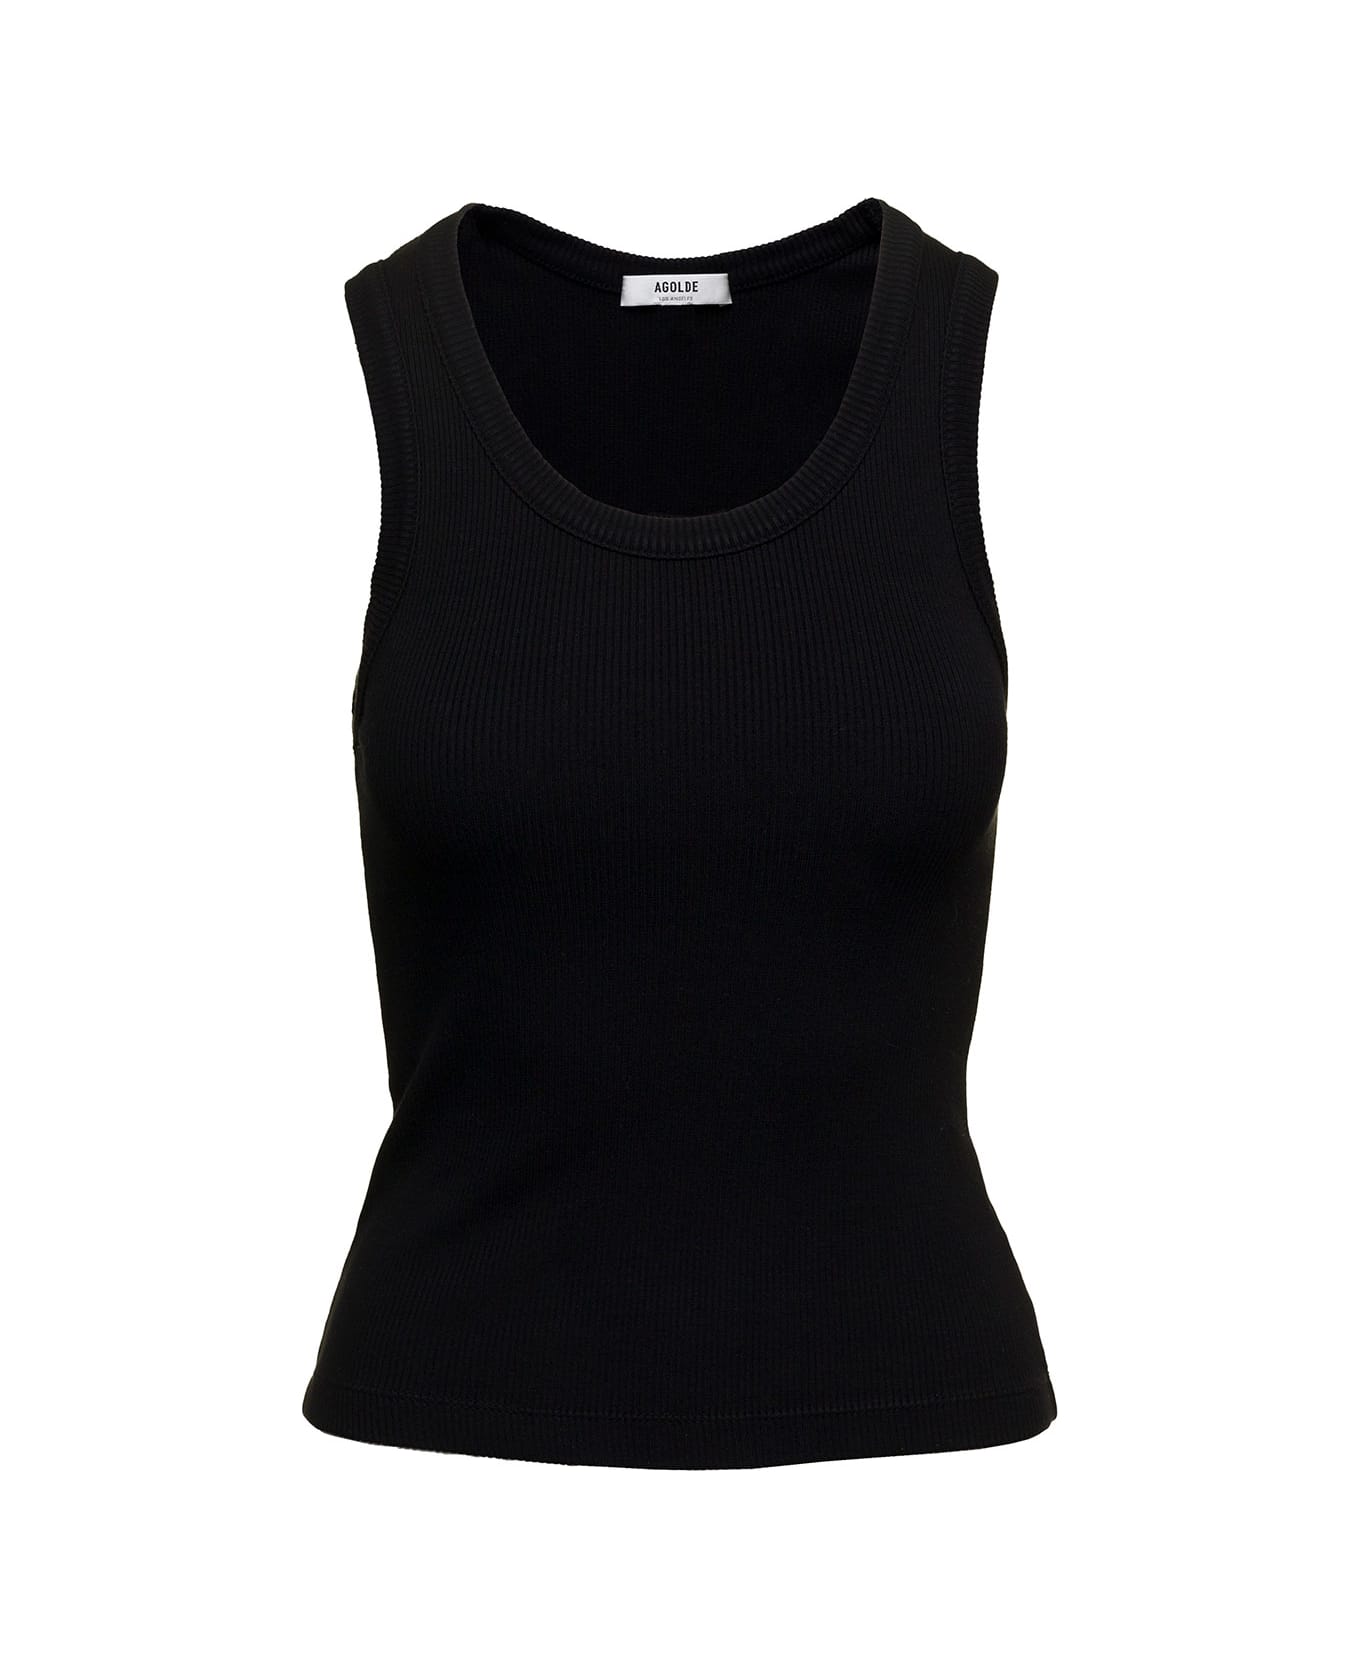 AGOLDE Black Ribbed Tank Top With U Neckline In Cotton Blend Woman - Black